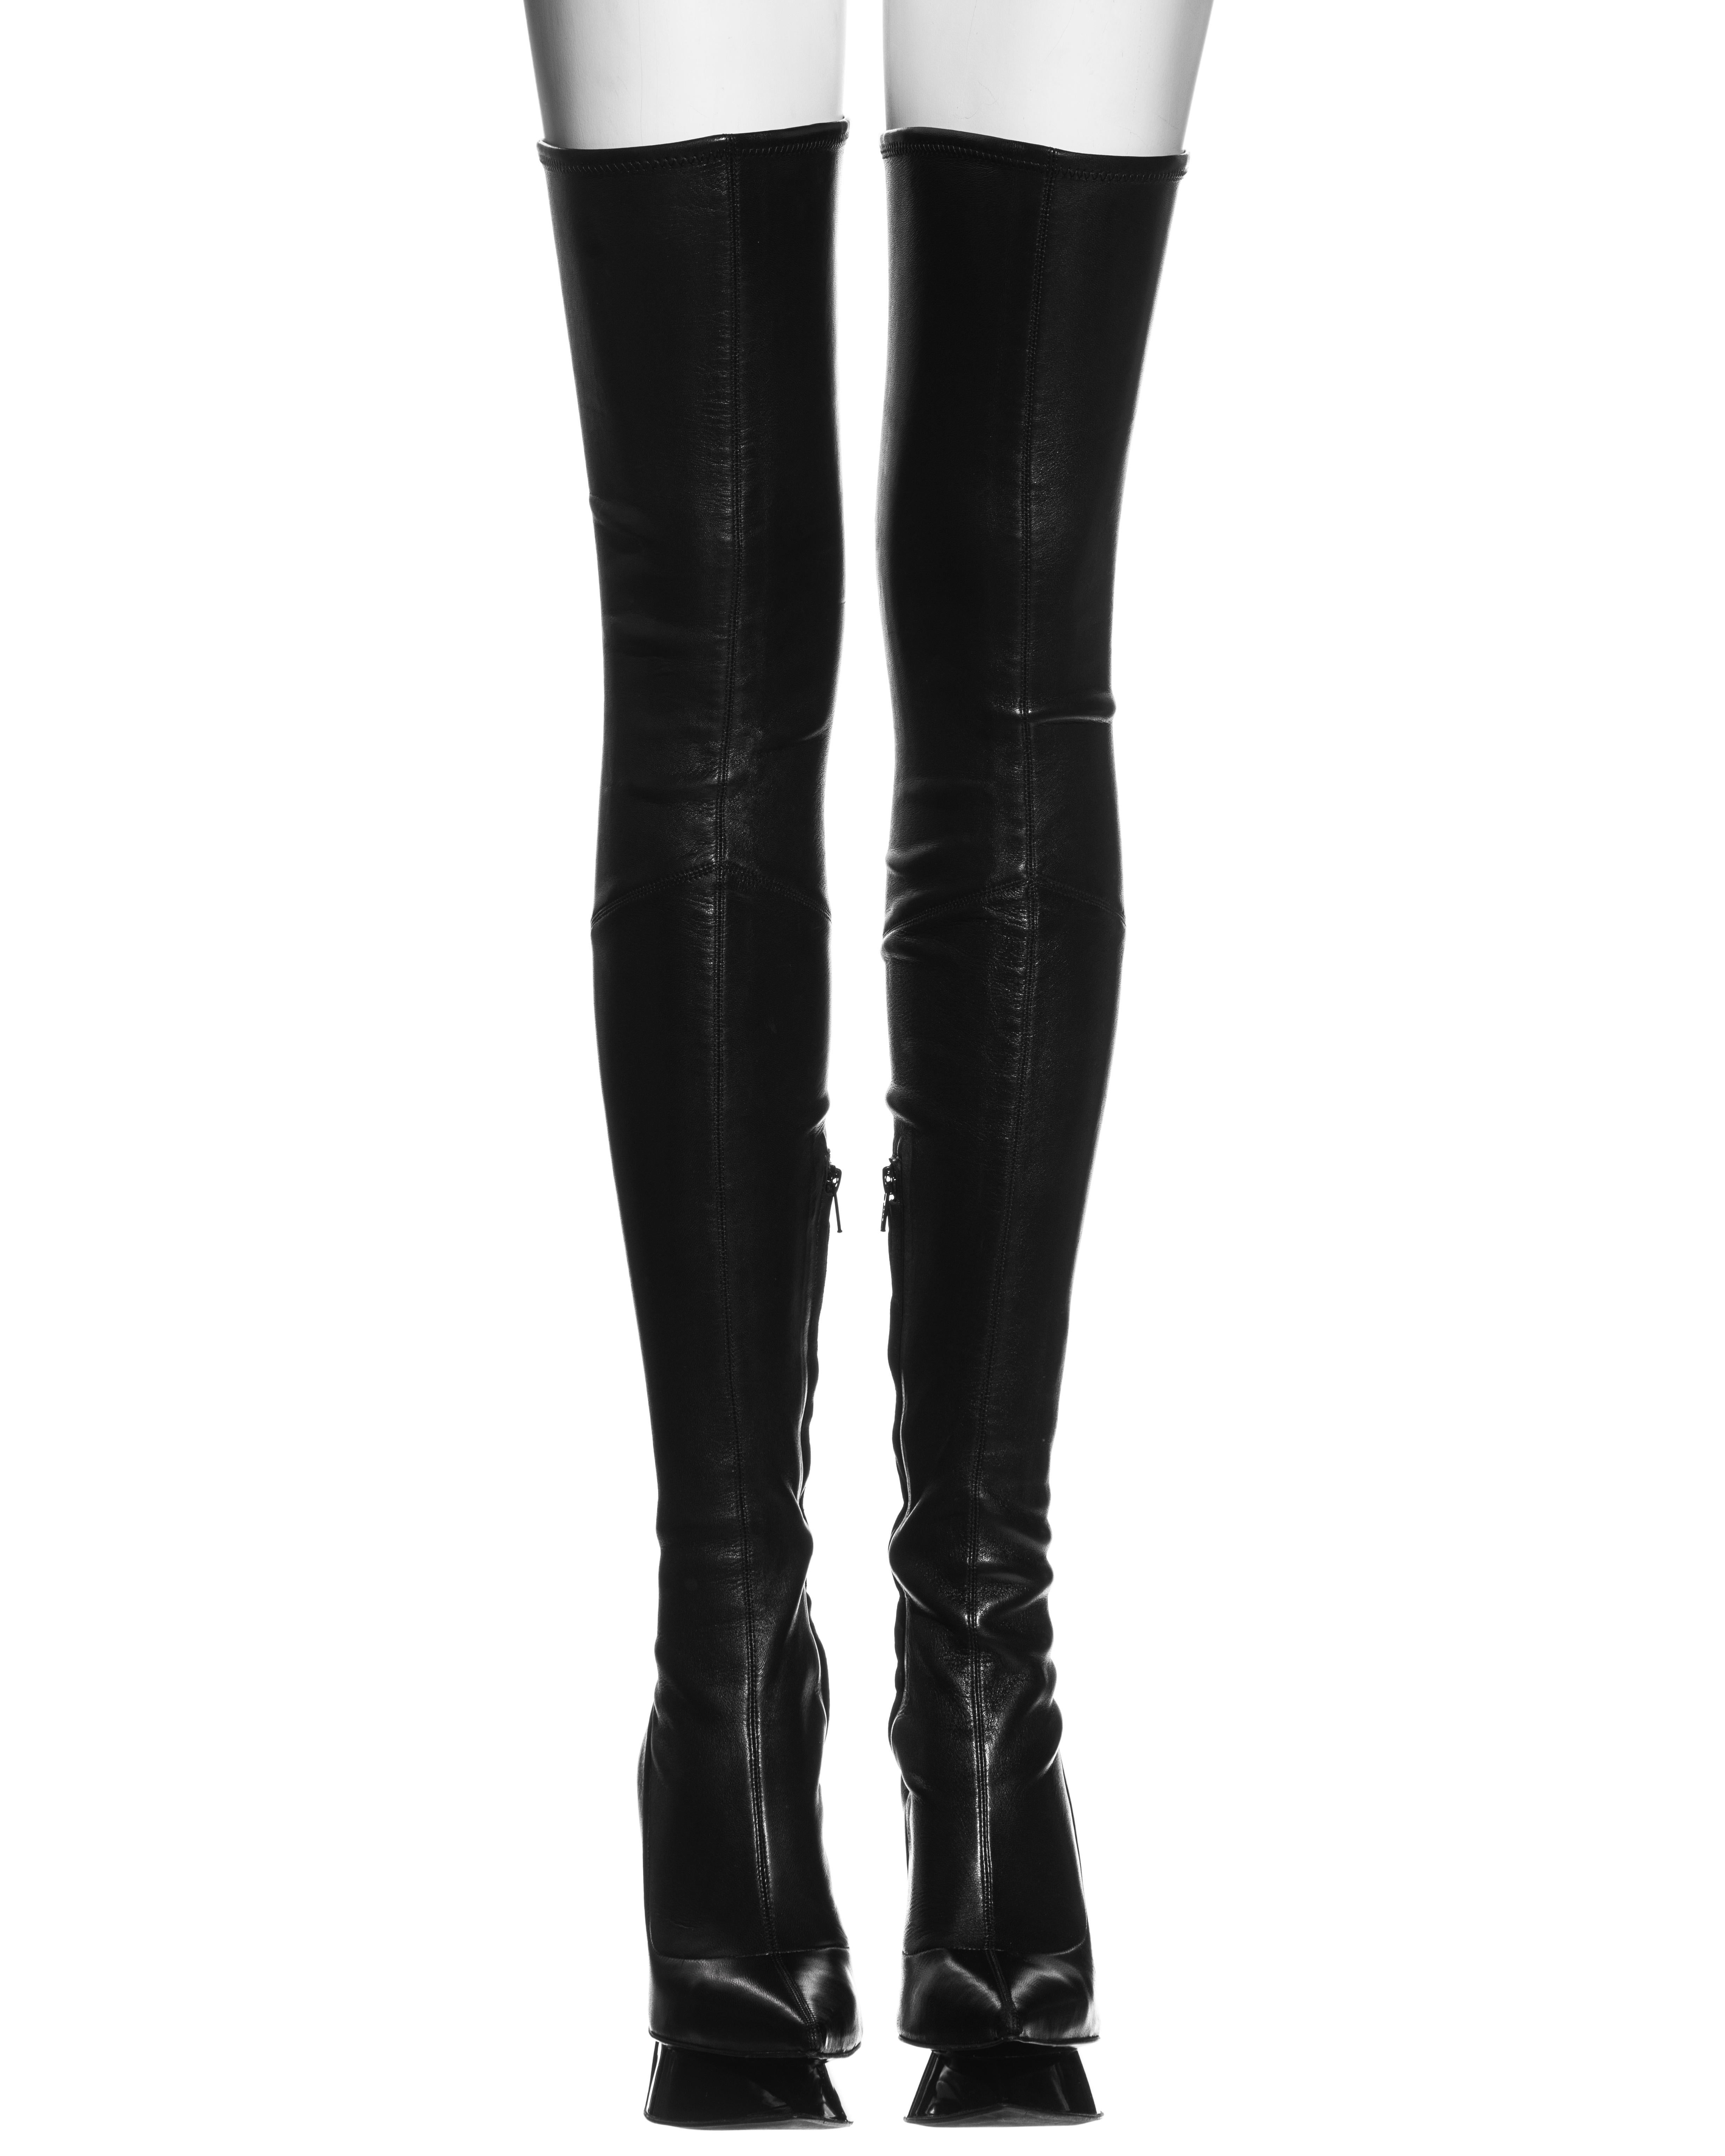 ▪ Alexander McQueen black lambskin leather thigh-high boots
▪ Silver metal spiked studs
▪ Patent leather platform 
▪ Zip fastening at the inseams 
▪ EU 39
▪ Horn of Plenty, Fall-Winter 2009